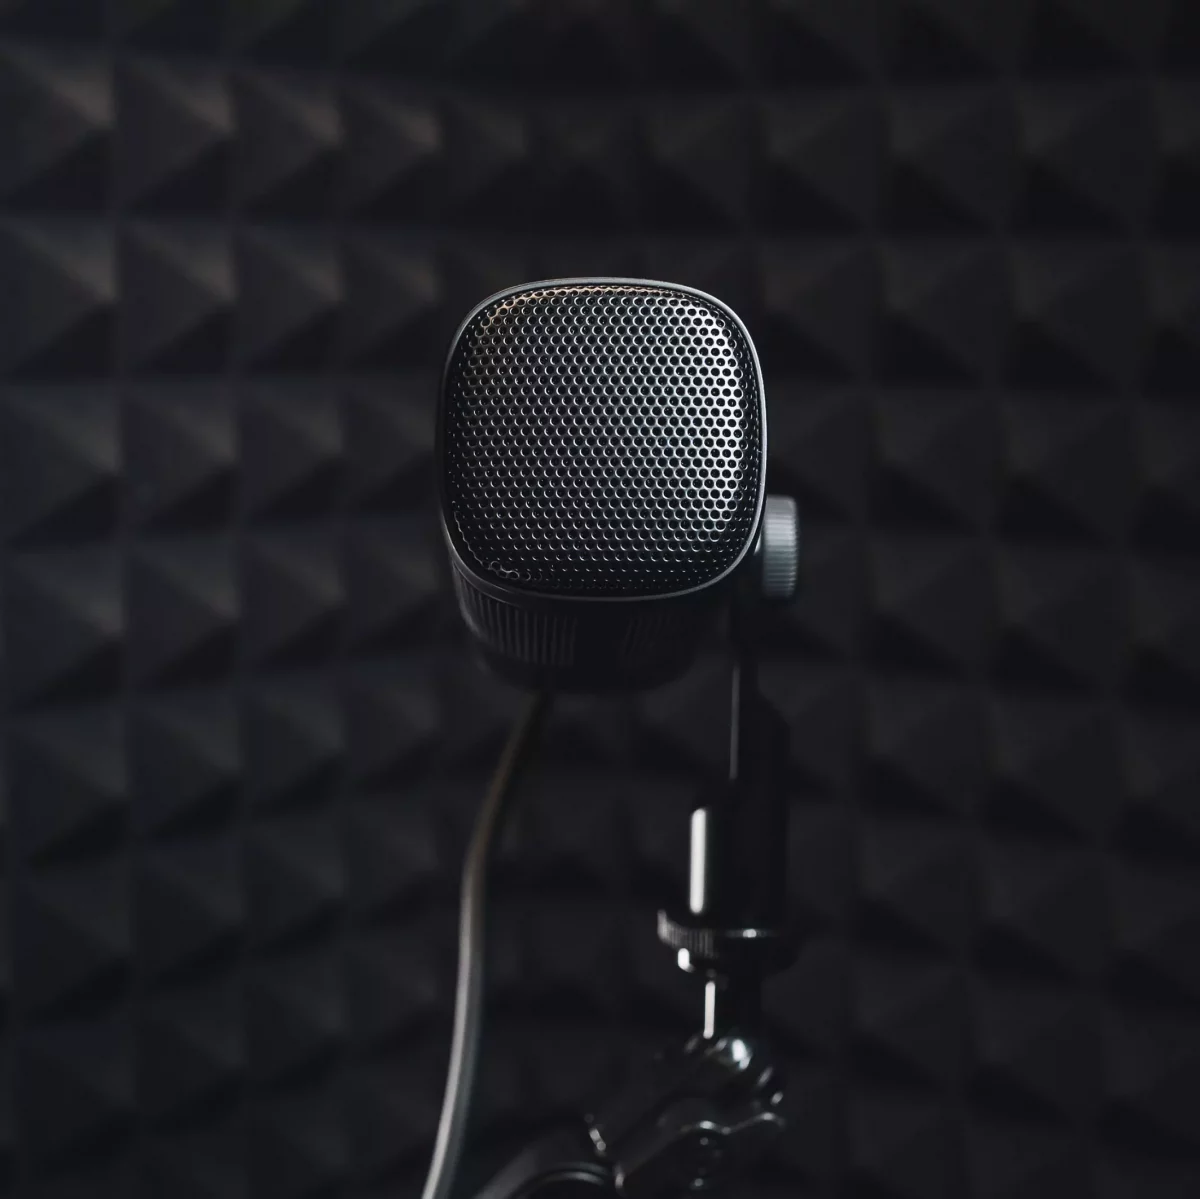 4_Elgato_Wave_DX_microphone_front_view_in_sound_booth_studio_Square